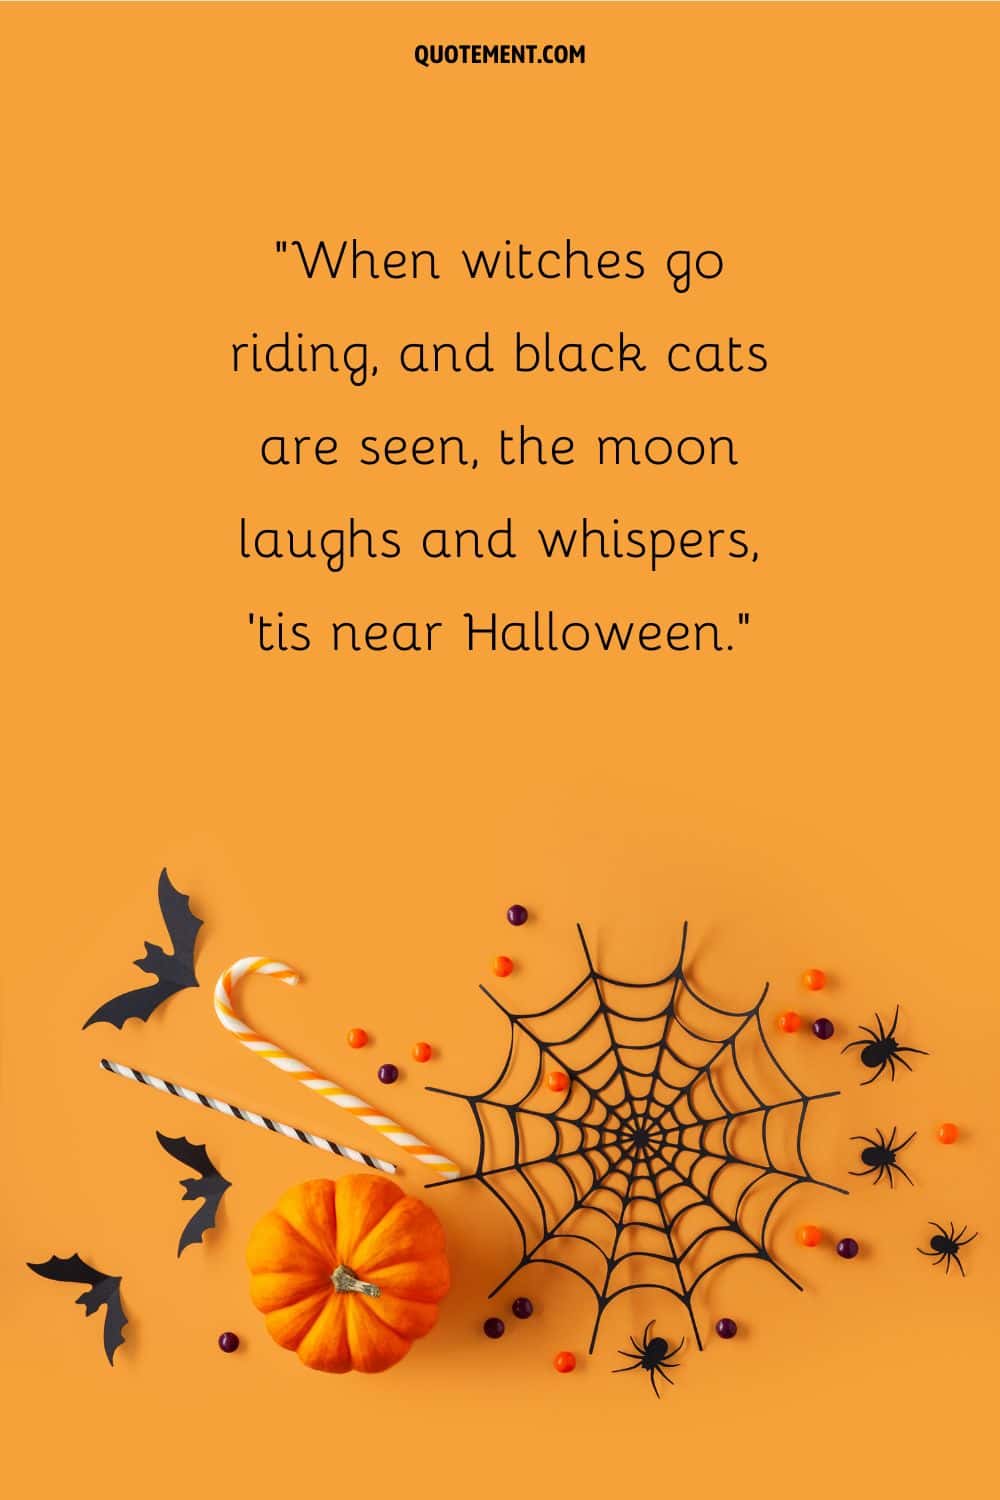 When witches go riding, and black cats are seen, the moon laughs and whispers, 'tis near Halloween